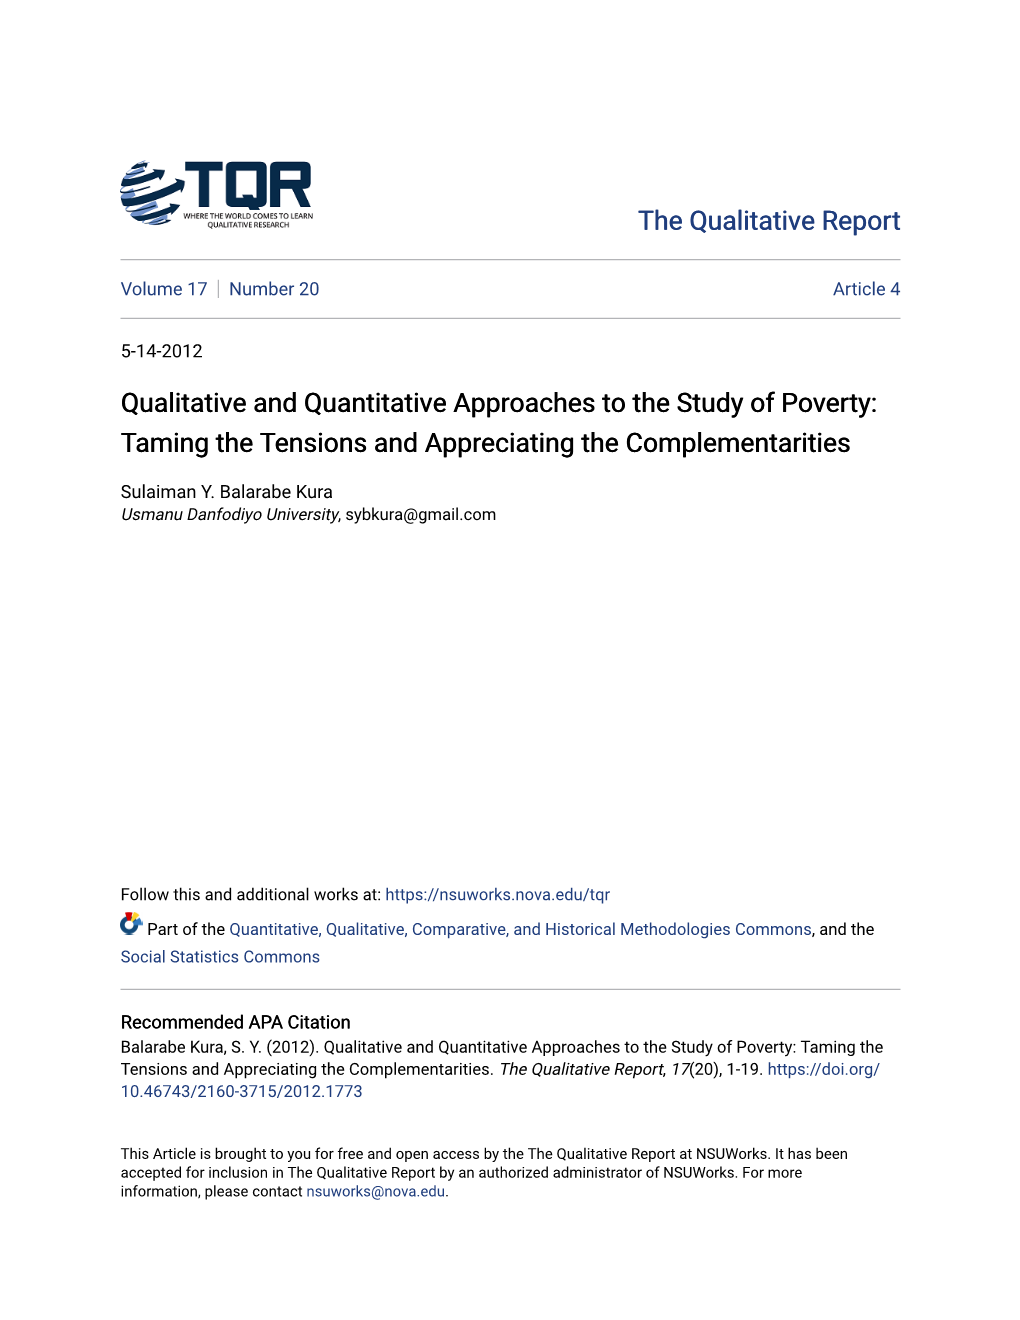 Qualitative and Quantitative Approaches to the Study of Poverty: Taming the Tensions and Appreciating the Complementarities